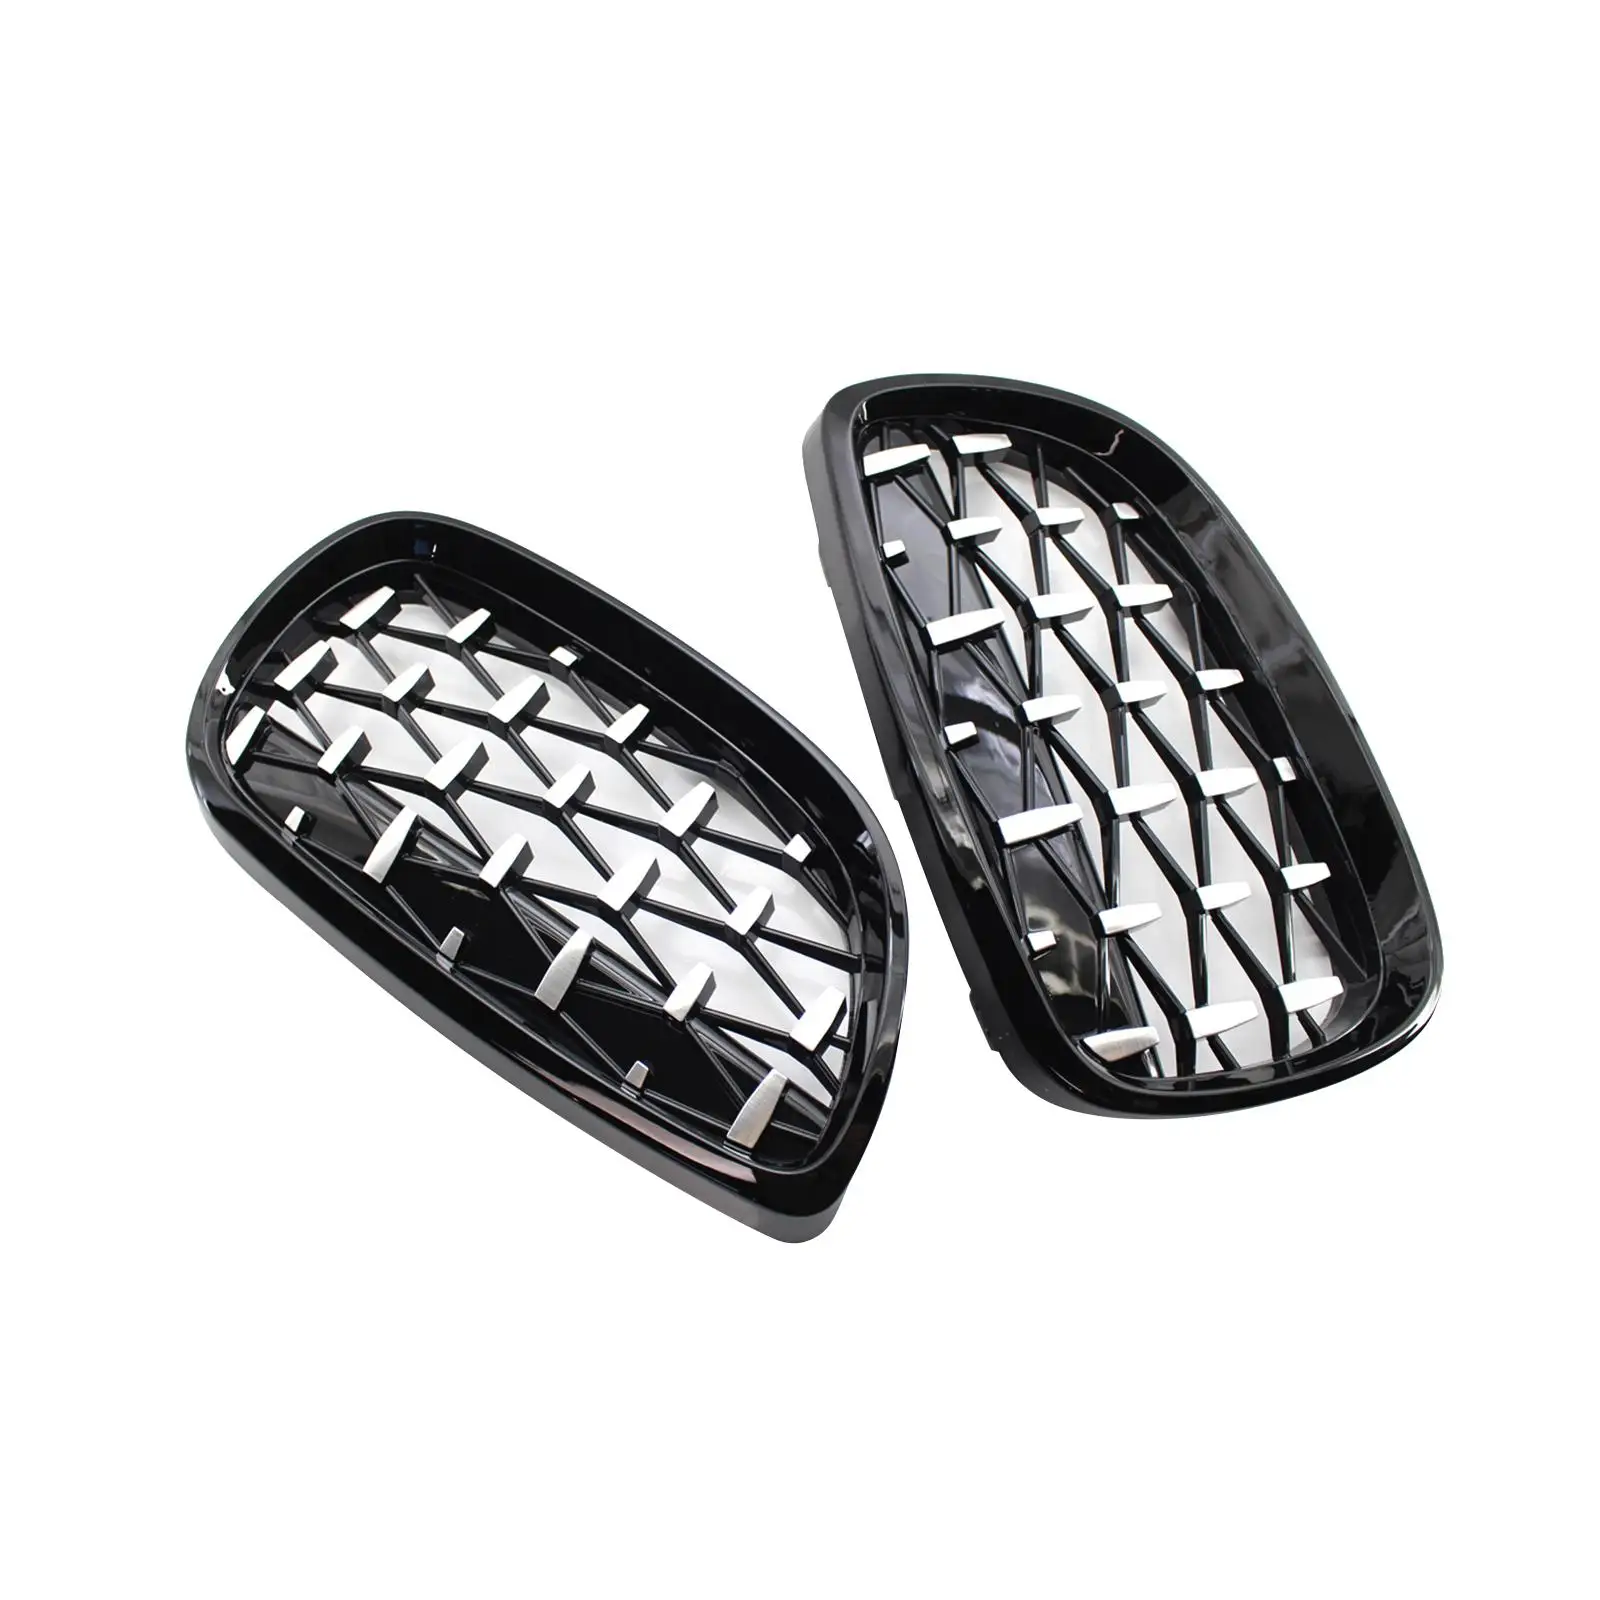 2x Automotive Front Hood Kidney Grille Grill 51137157278 Left Right for BMW E92 E93 3 Series Replace Durable